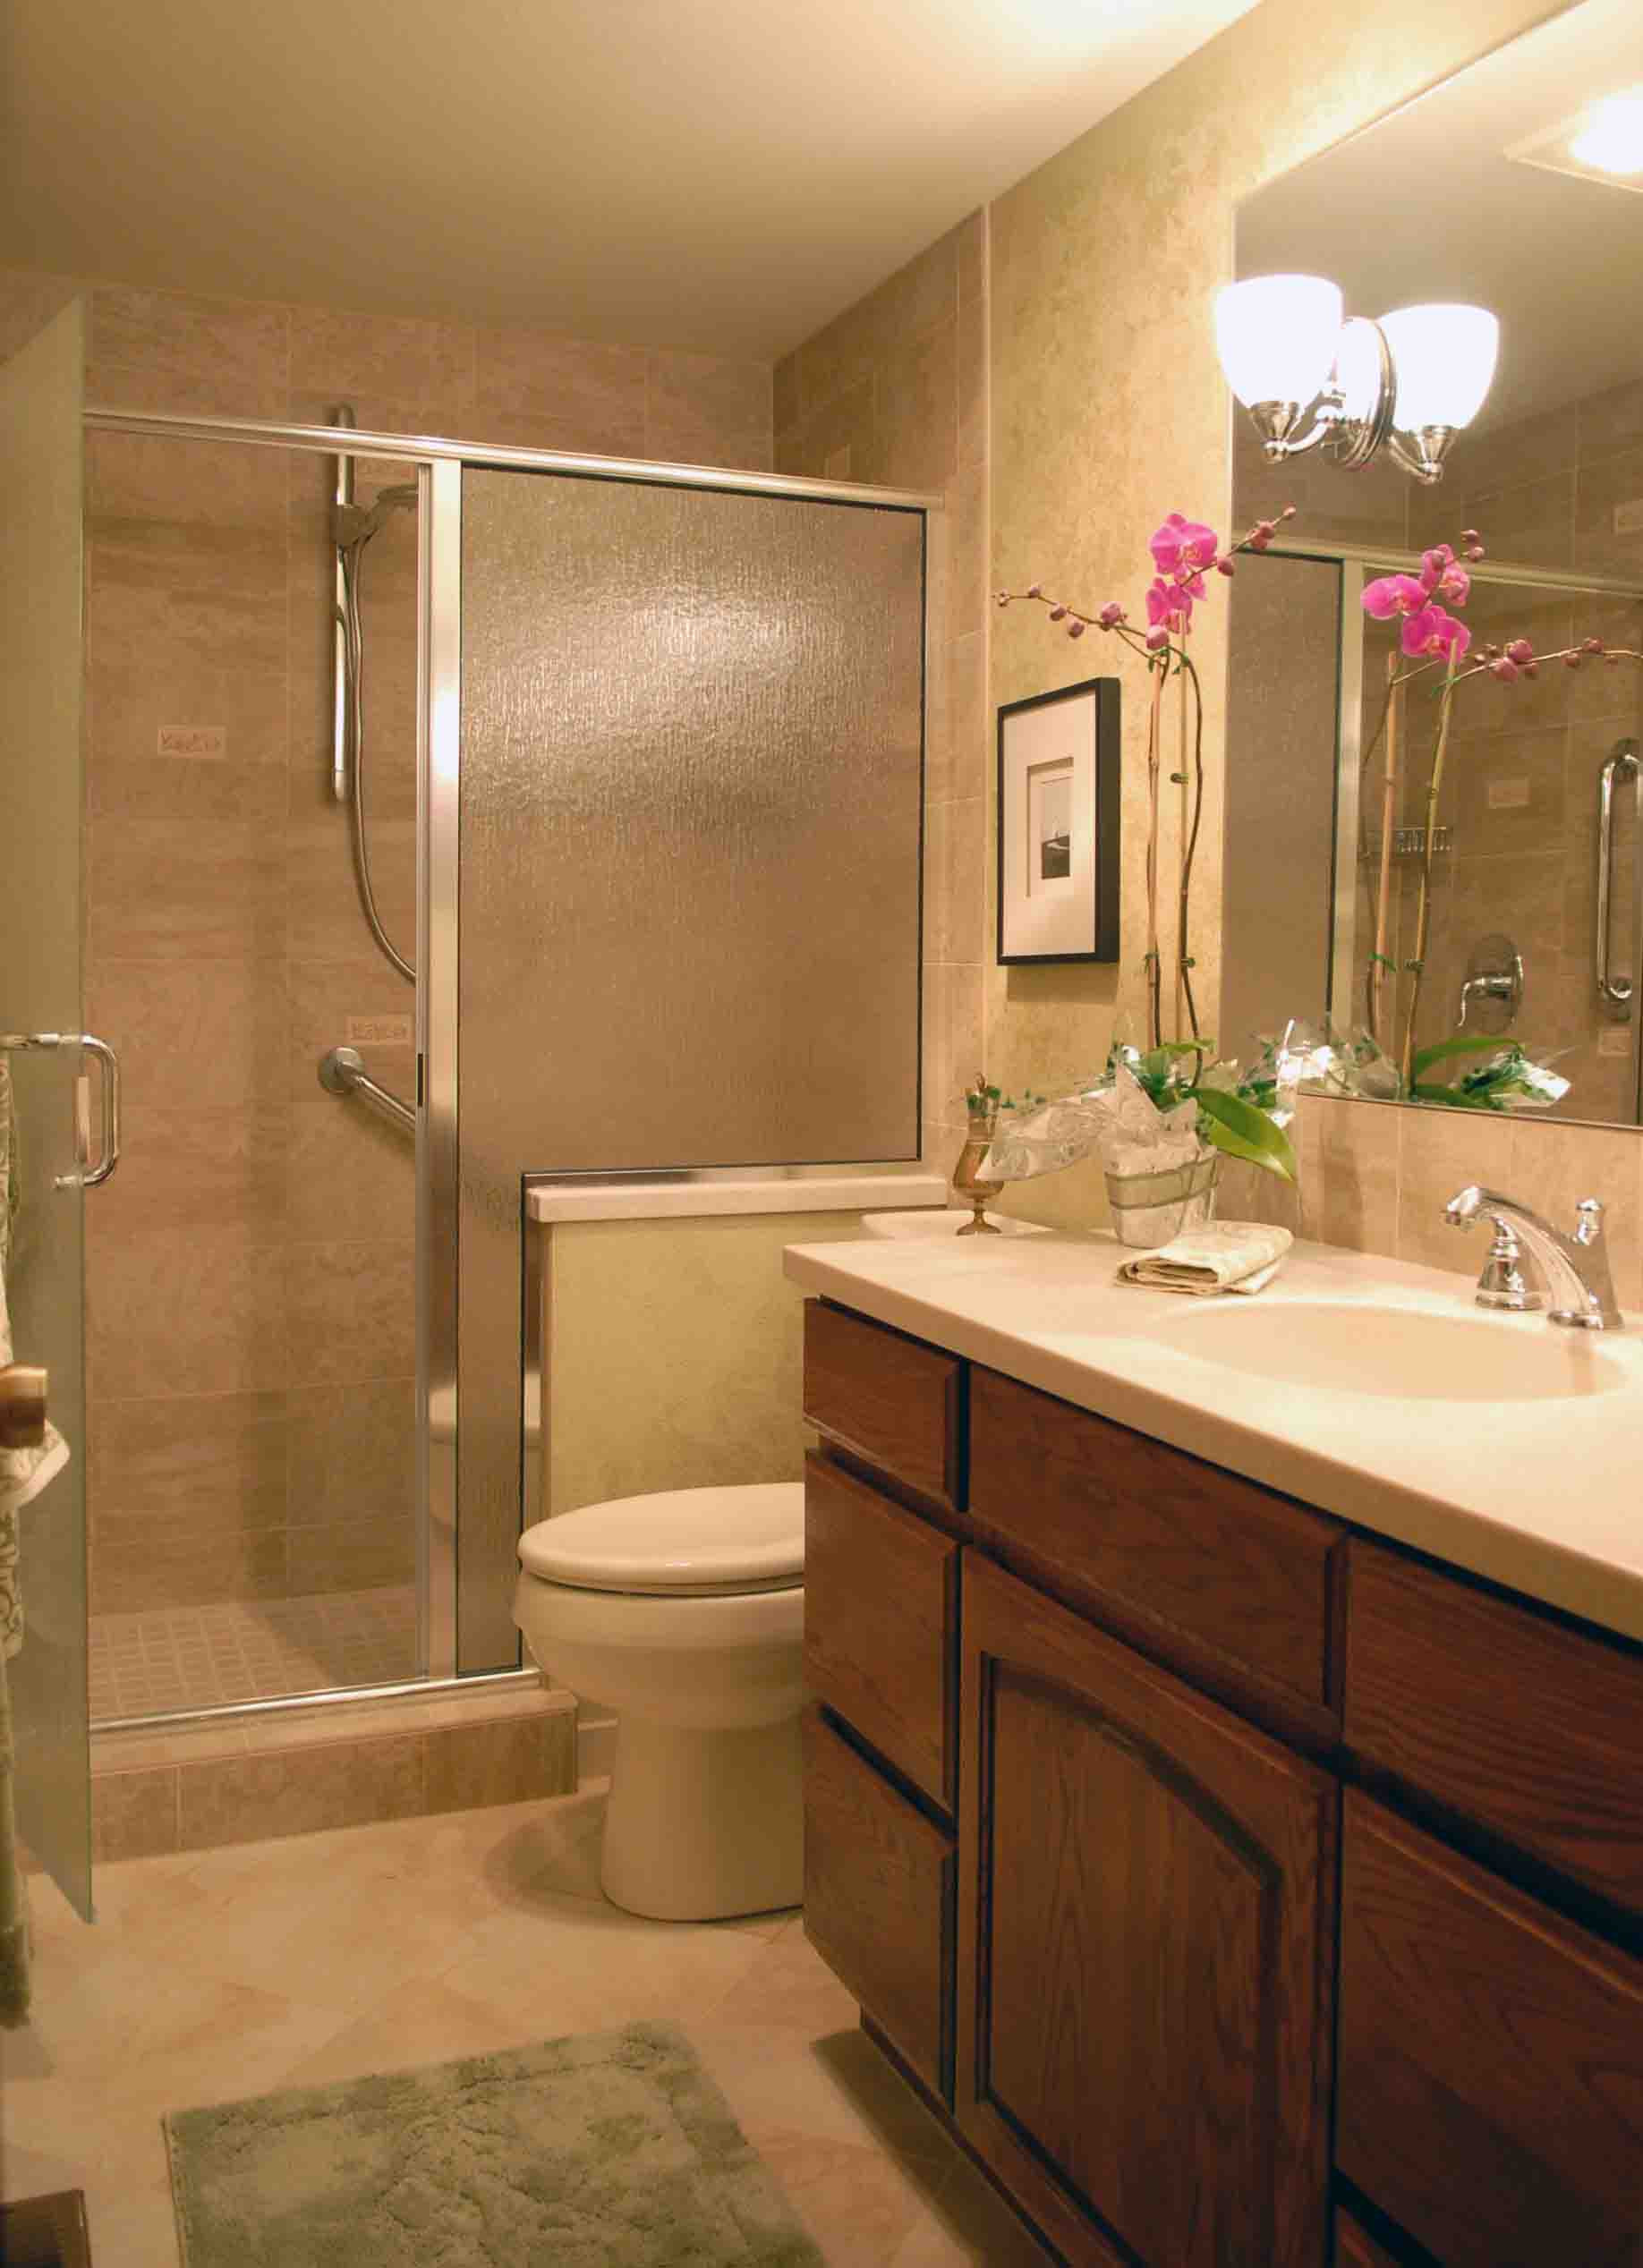 Bathroom Designs For Small Bathrooms
 Bathroom Remodeling Ideas for Small Bath TheyDesign